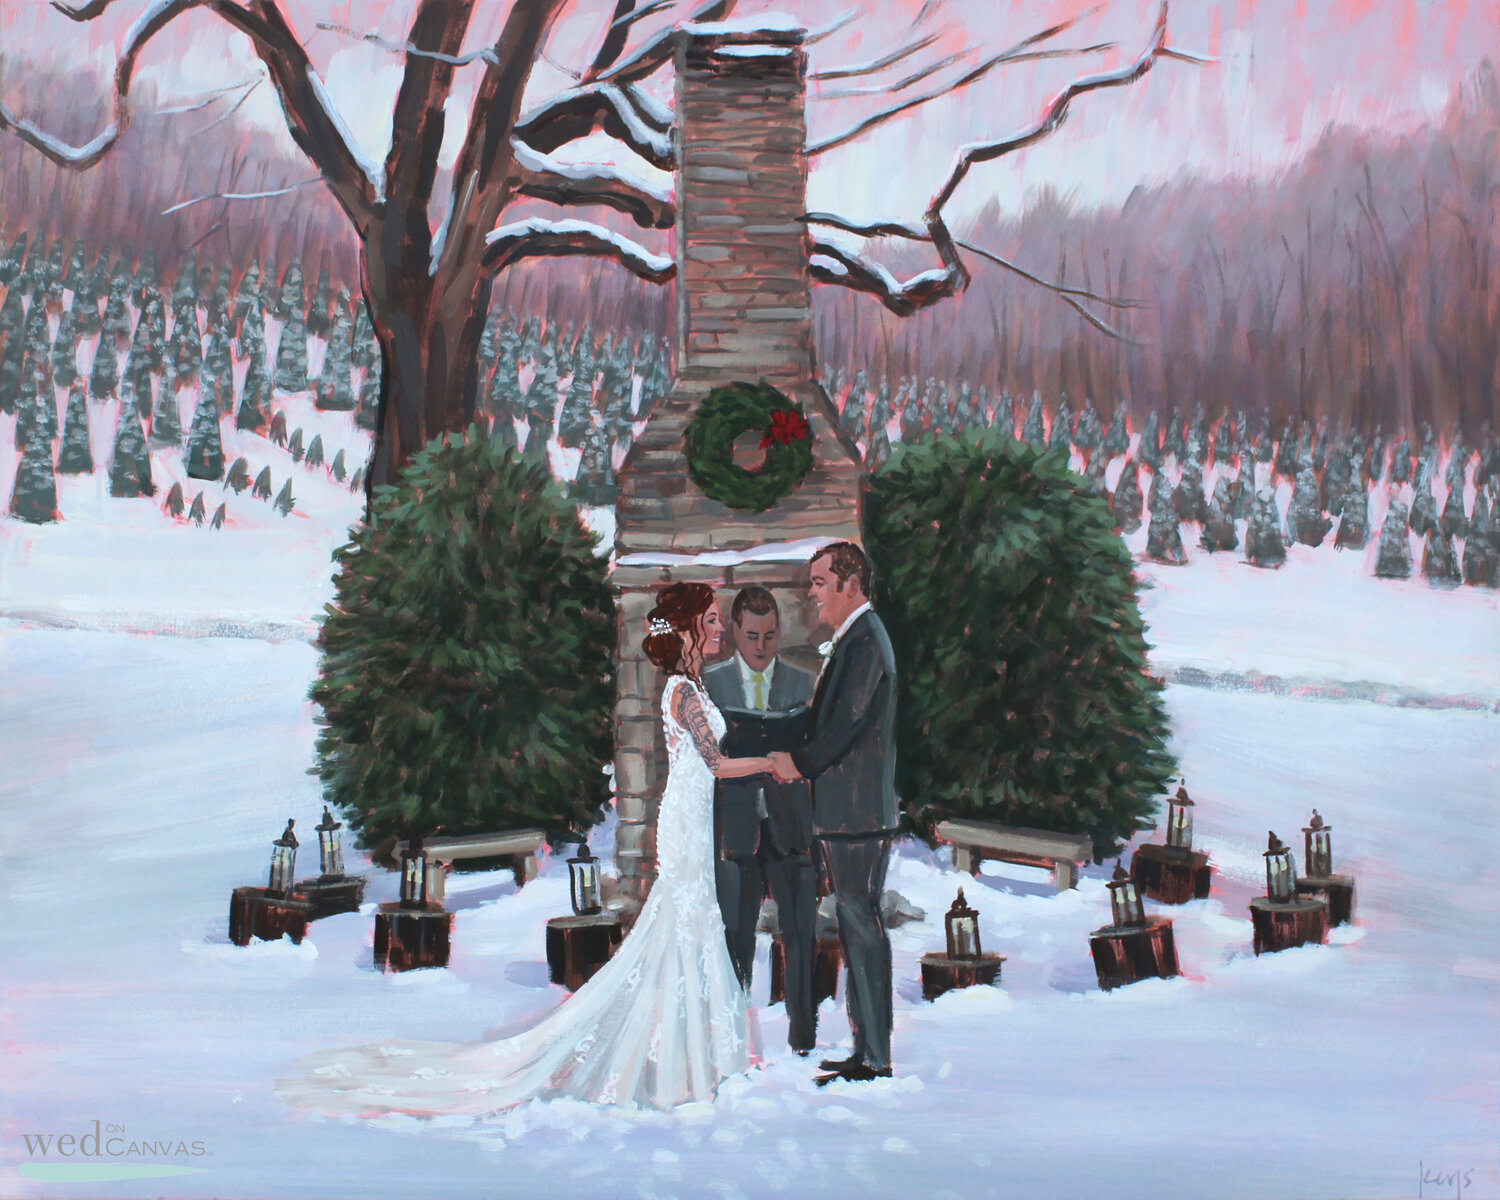 Live Wedding Painting created during a snow storm at Sawyer Family Farmstead in Cashiers, NC.